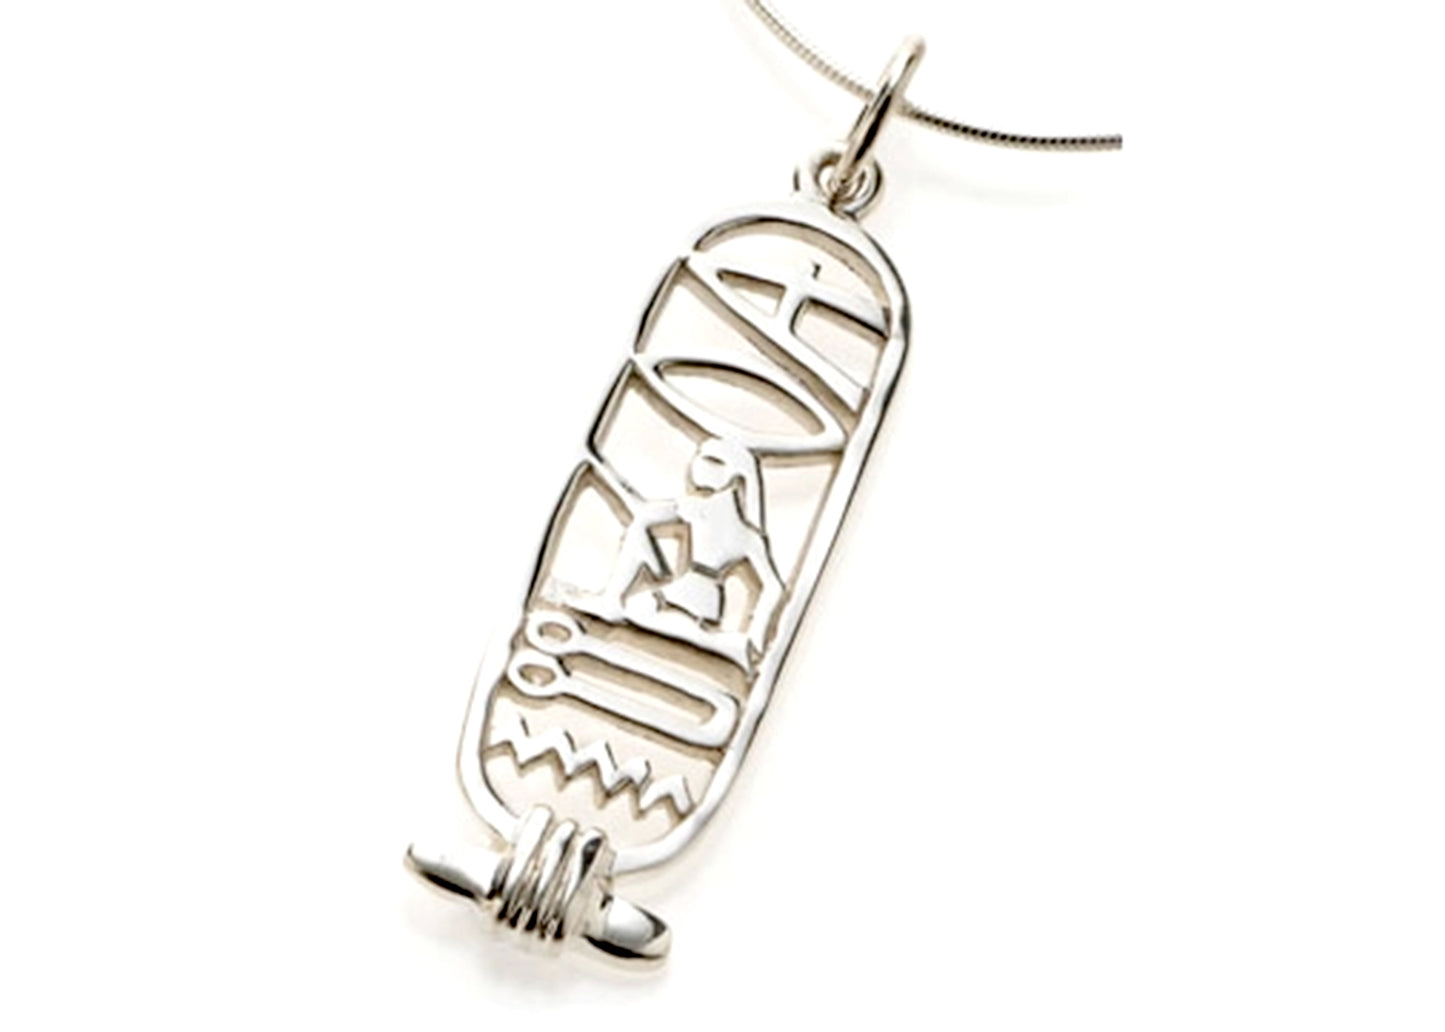 I Love You Cartouche Necklace in Silver